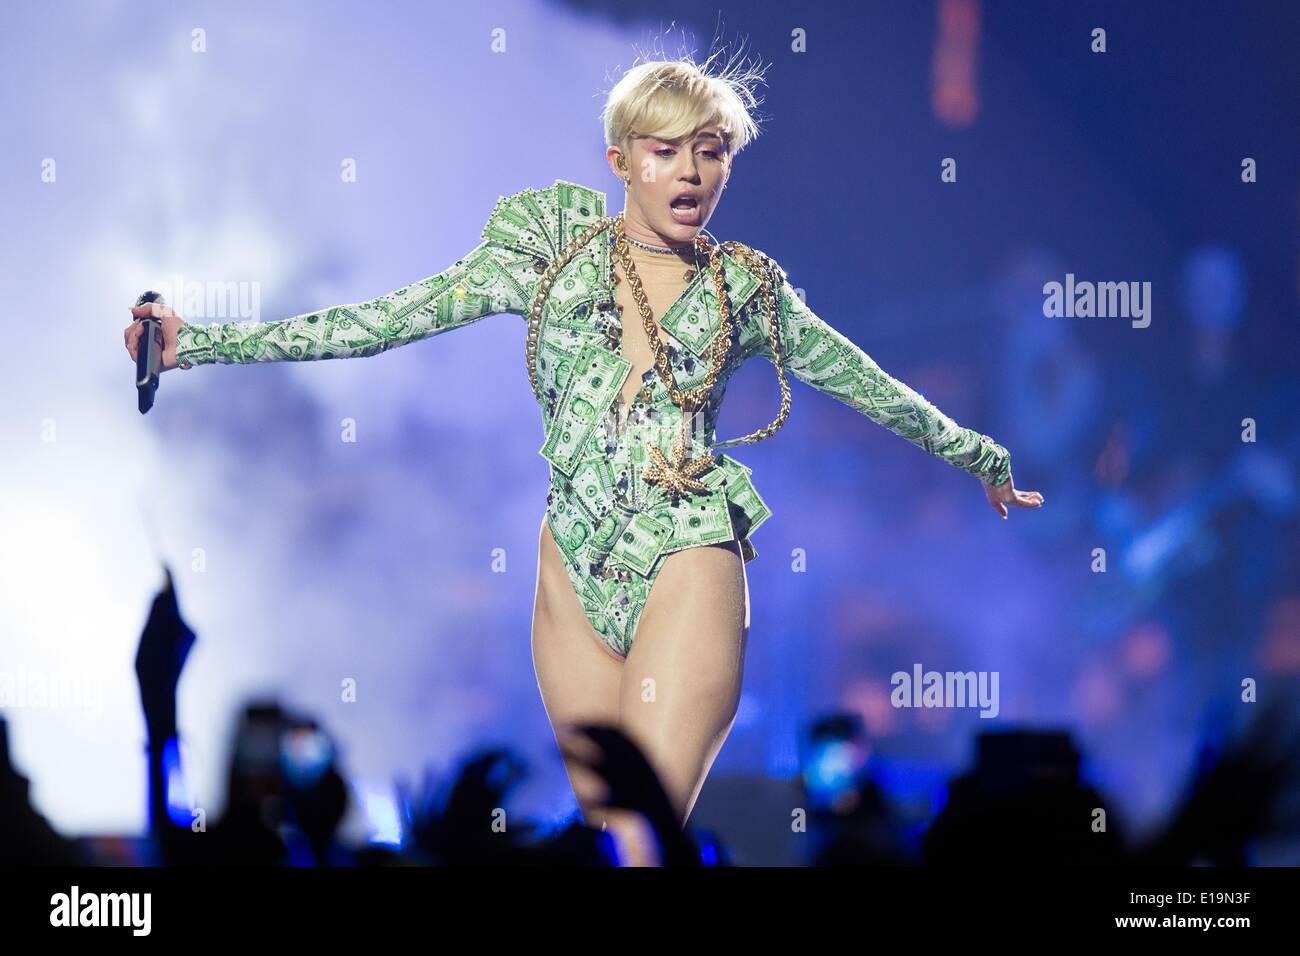 Cologne, Germany. 26th May, 2014. US singer Miley Cyrus performs on stage at the Lanxess-Arena concert venue in Cologne, Germany, 26 May 2014. The event marked the first of two concerts in Germany on her current concert tour. Photo: Marius Becker/dpa/Alamy Live News Stock Photo